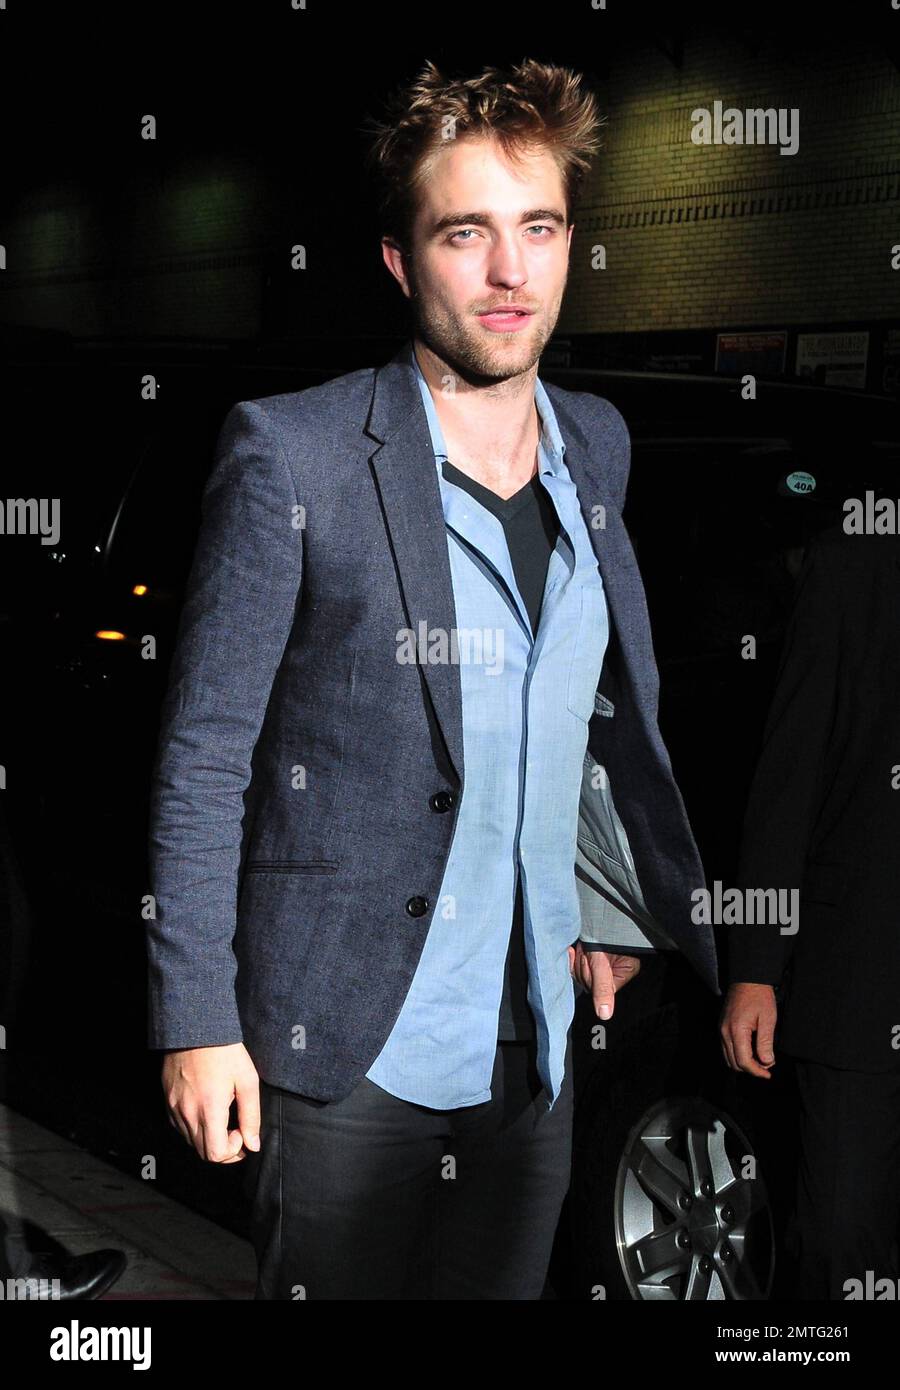 'Twilight Saga' star Robert Pattinson poses for photos outside the 'Late Show with David Letterman' studios. Pattinson, best known for his character Edward Cullen, is currently promoting the latest movie in the series 'Breaking Dawn Part 1' due in theaters on November 18. New York, NY. 8th November 2011.    . Stock Photo